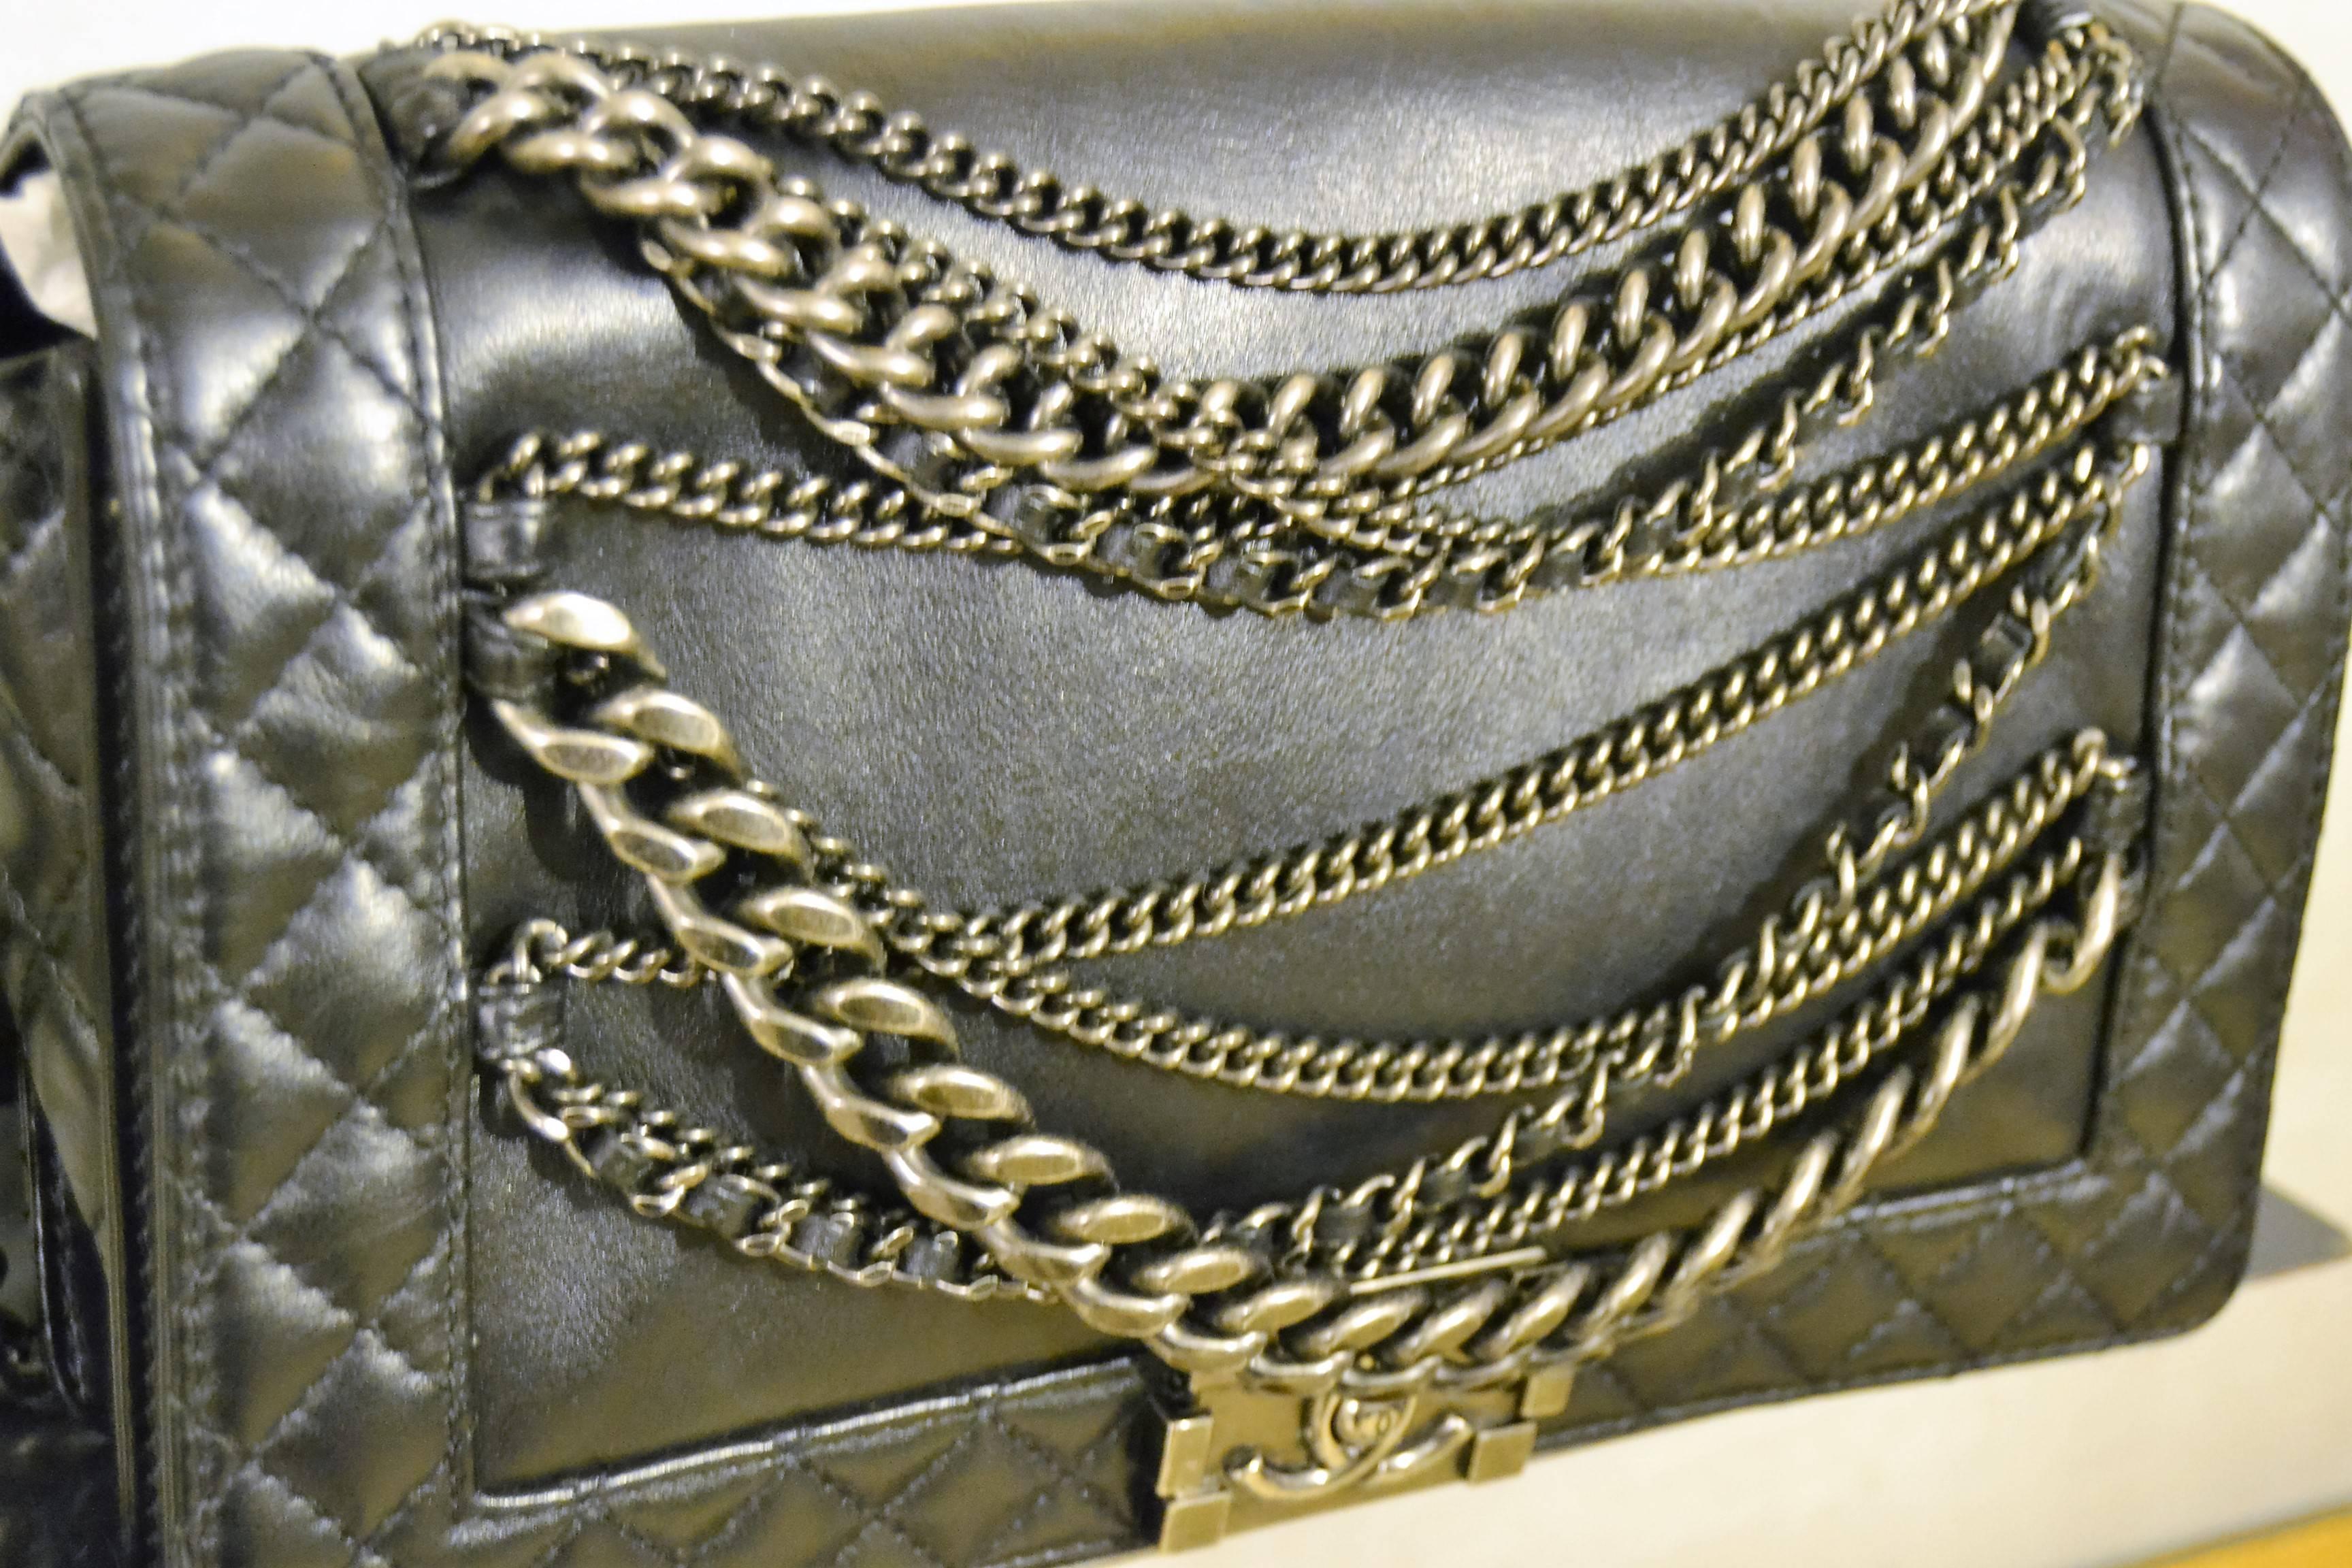 2000s Chanel Boy multi chain lambskin bag

This 2013 Cruise Collection Chanel Boy in Black with Multi Chains detail is a clever creation by Chanel.
It features gorgeous calfskin leather and Quilted trim and antiqued silvertone chain straps.
You